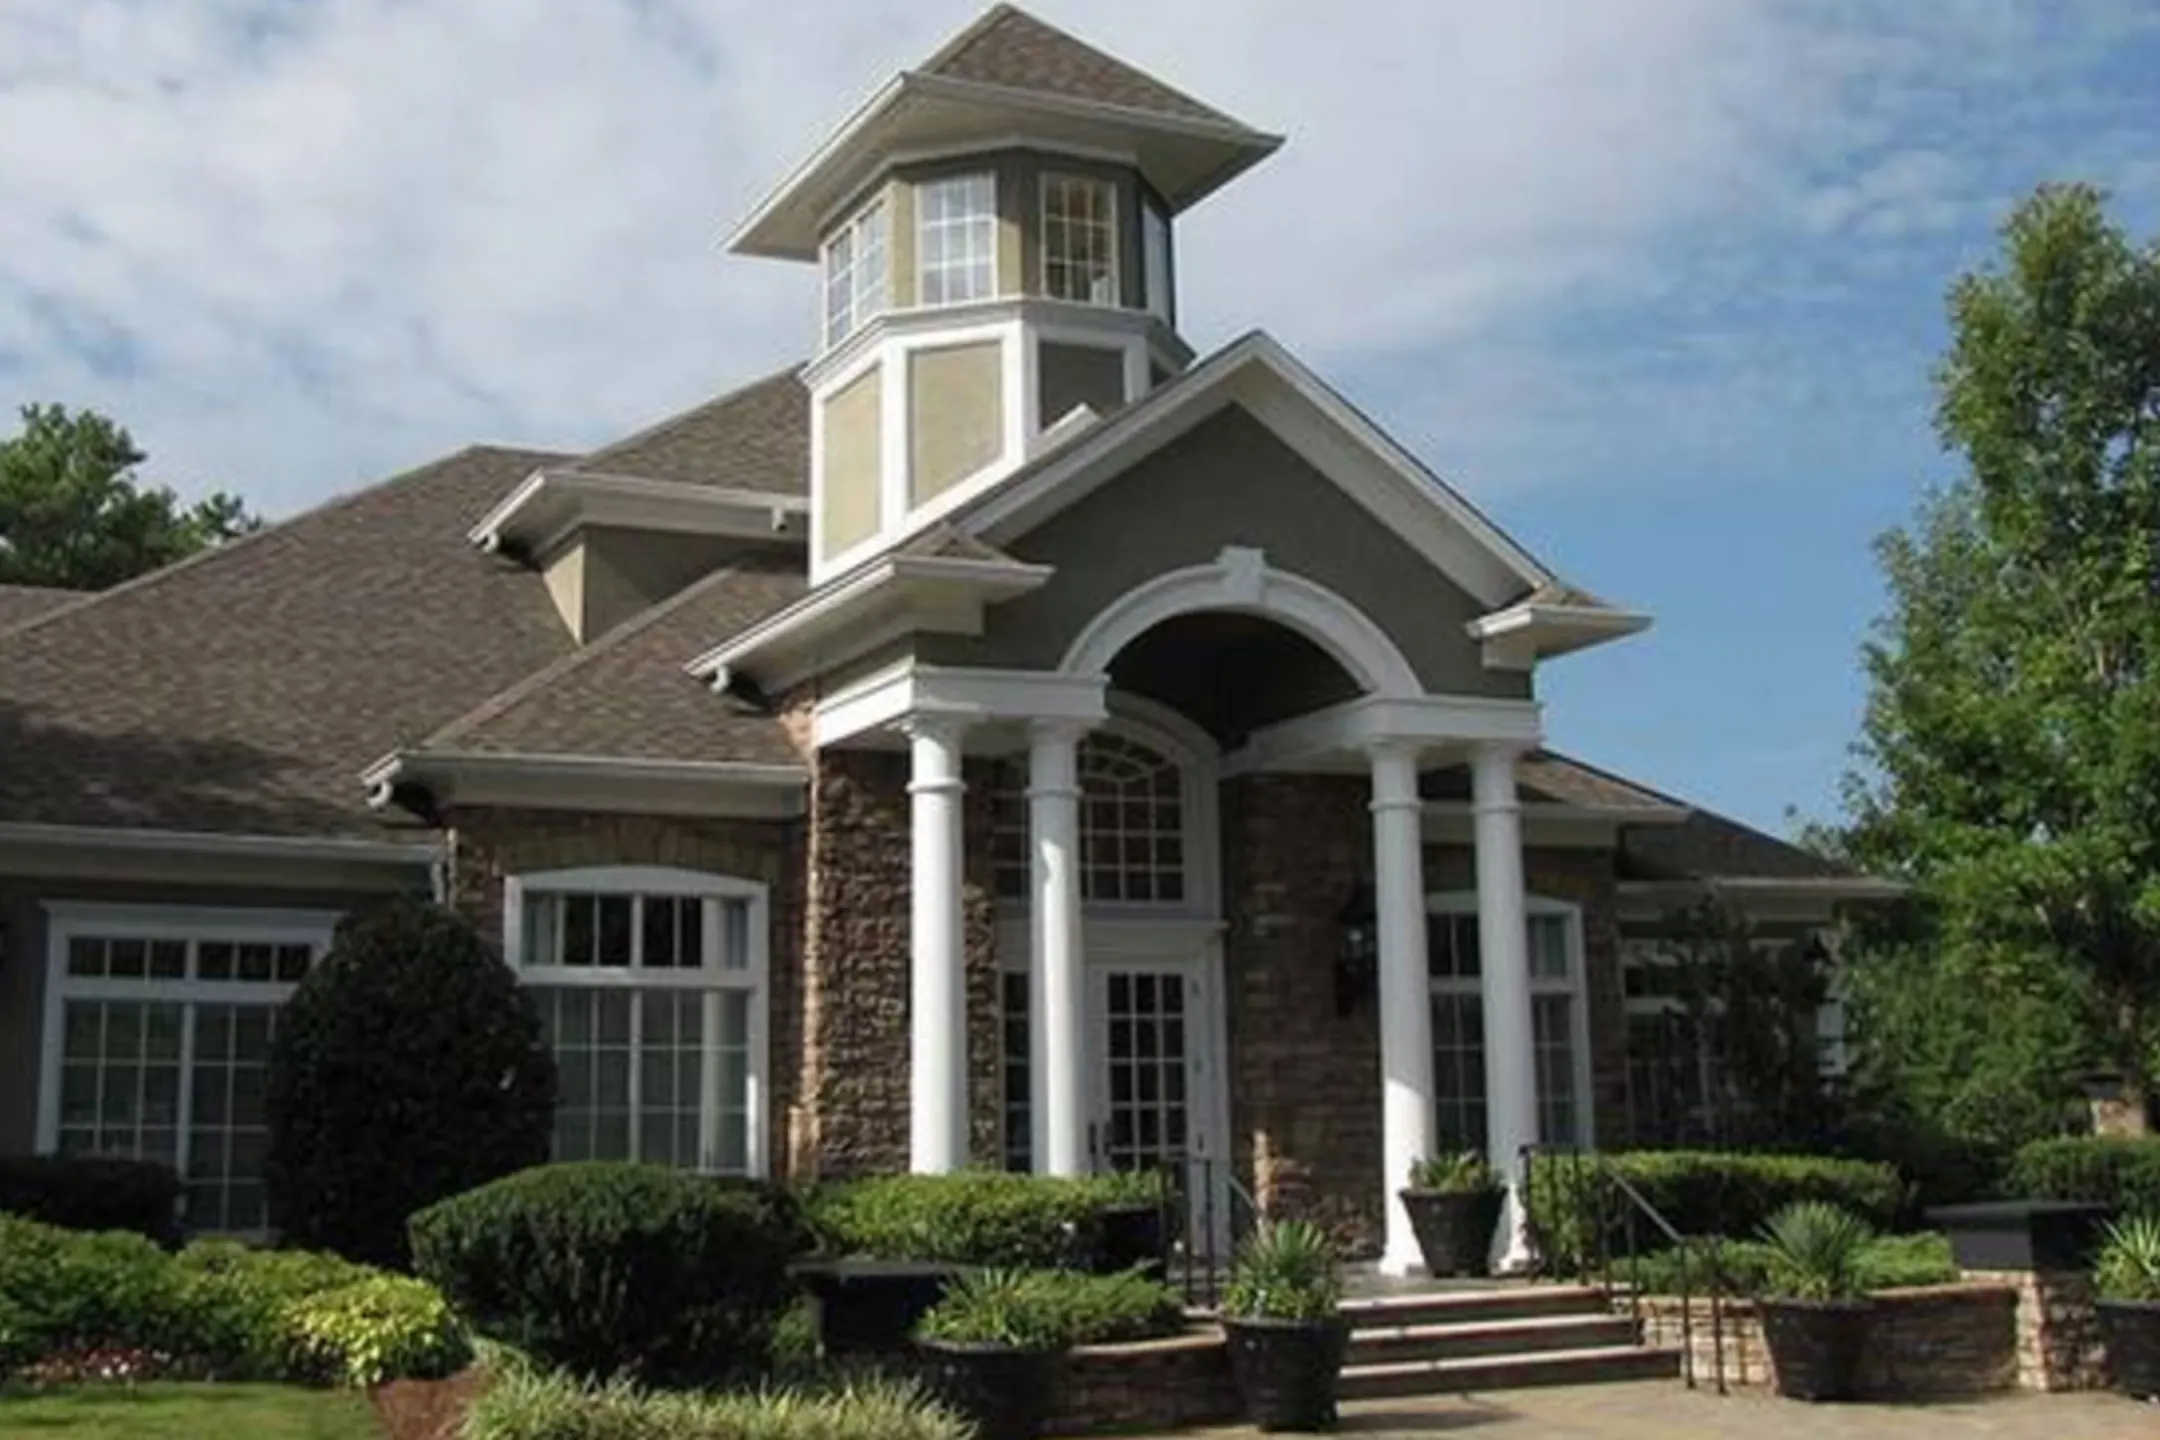 Building - The Heights at Towne Lake - Woodstock, GA